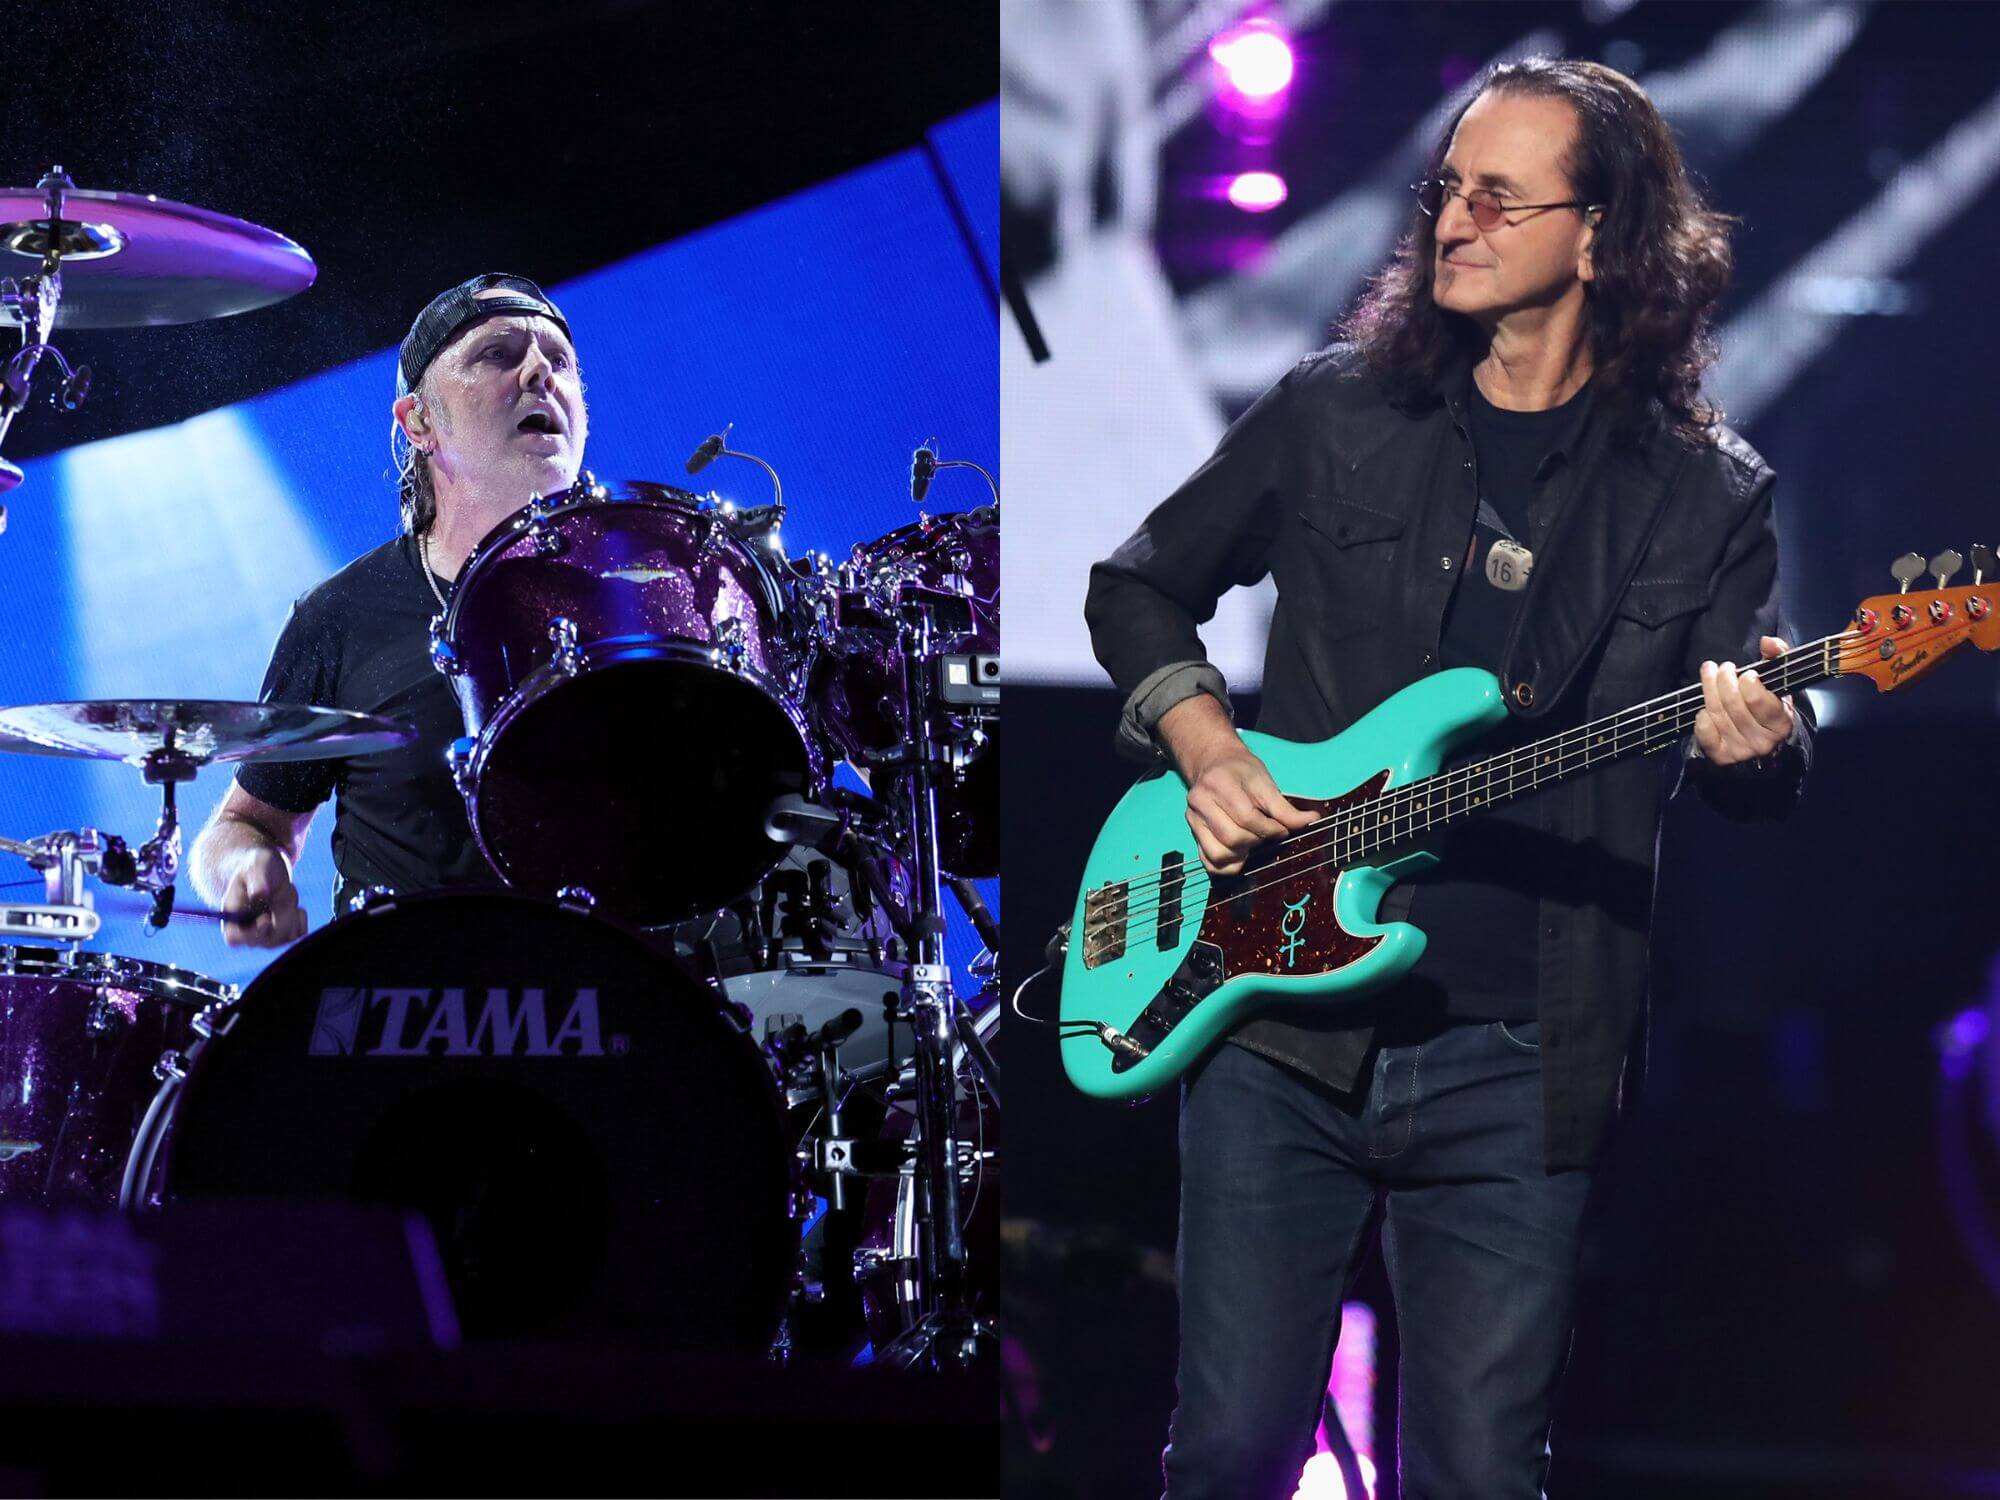 Lars Ulrich on Rush and performing with Geddy Lee